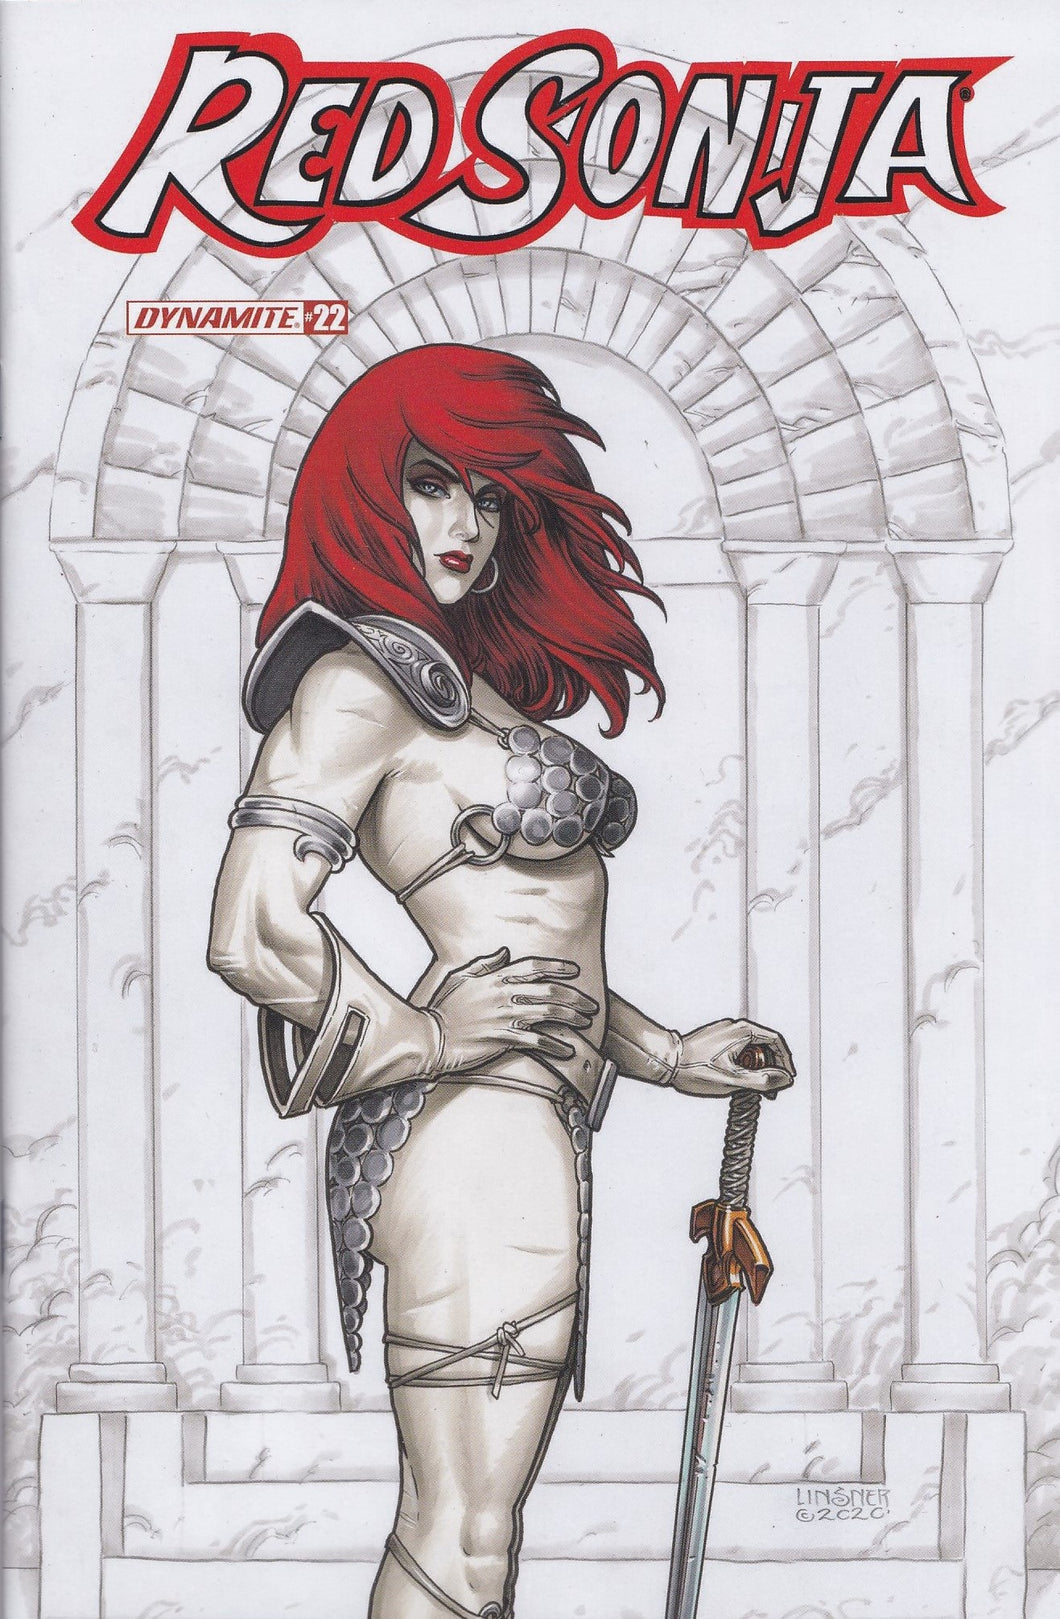 RED SONJA #22 (LINSNER VARIANT)(2020) COMIC BOOK ~ Dynamite Entertainment